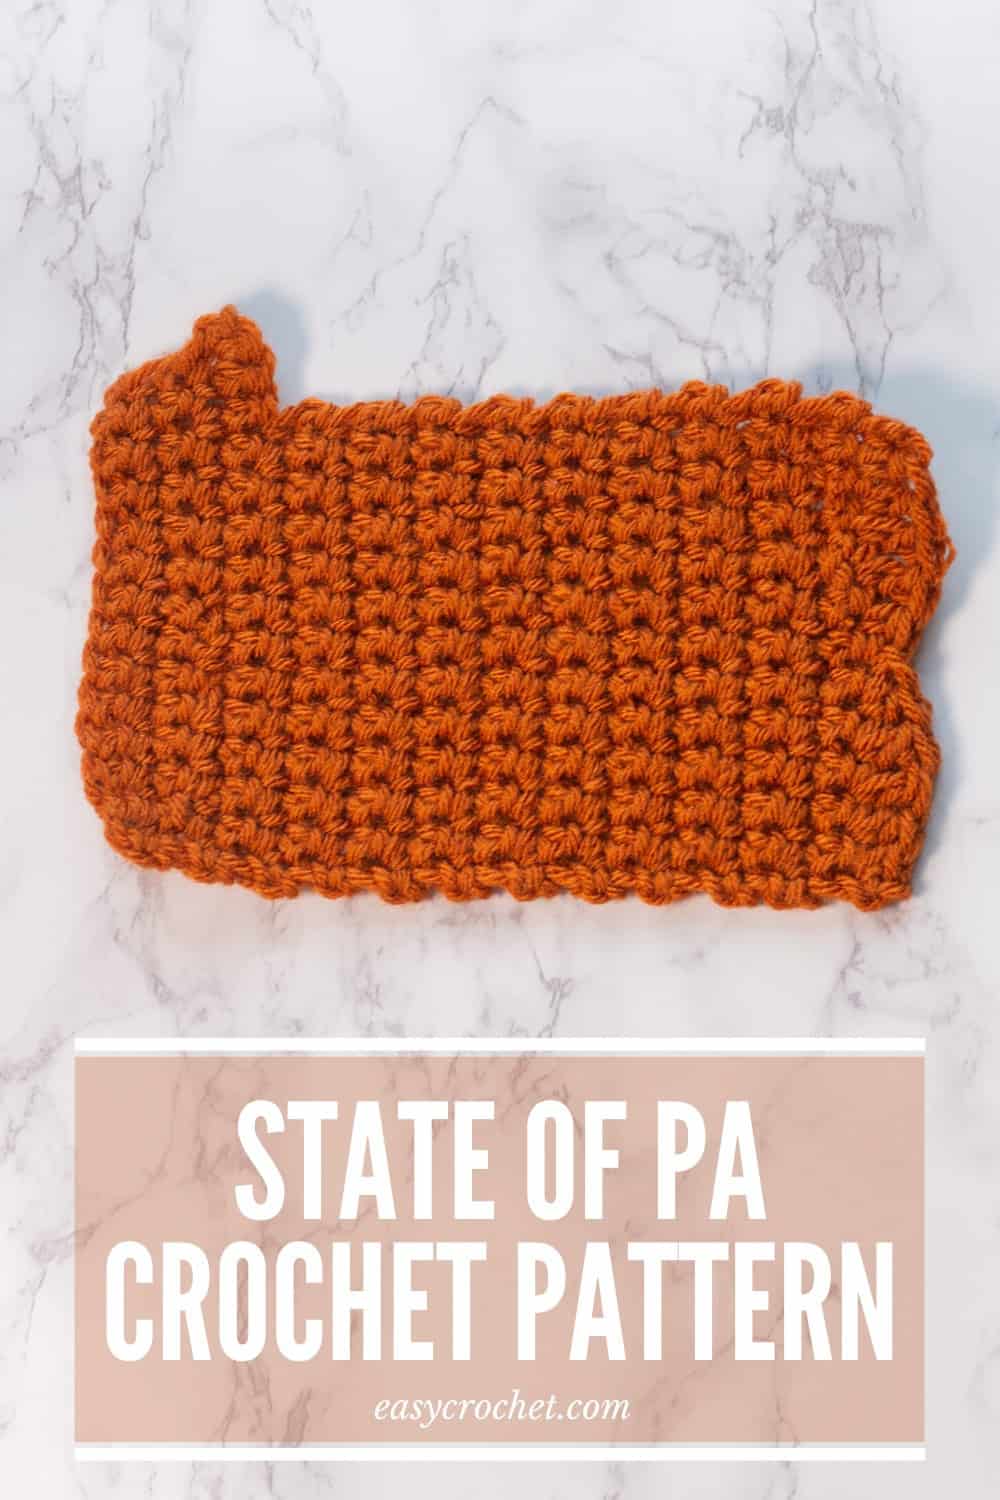 Free Crochet Pattern for the State of PA. Learn how to crochet Pennsylvania with this simple pattern from Easy Crochet. via @easycrochetcom